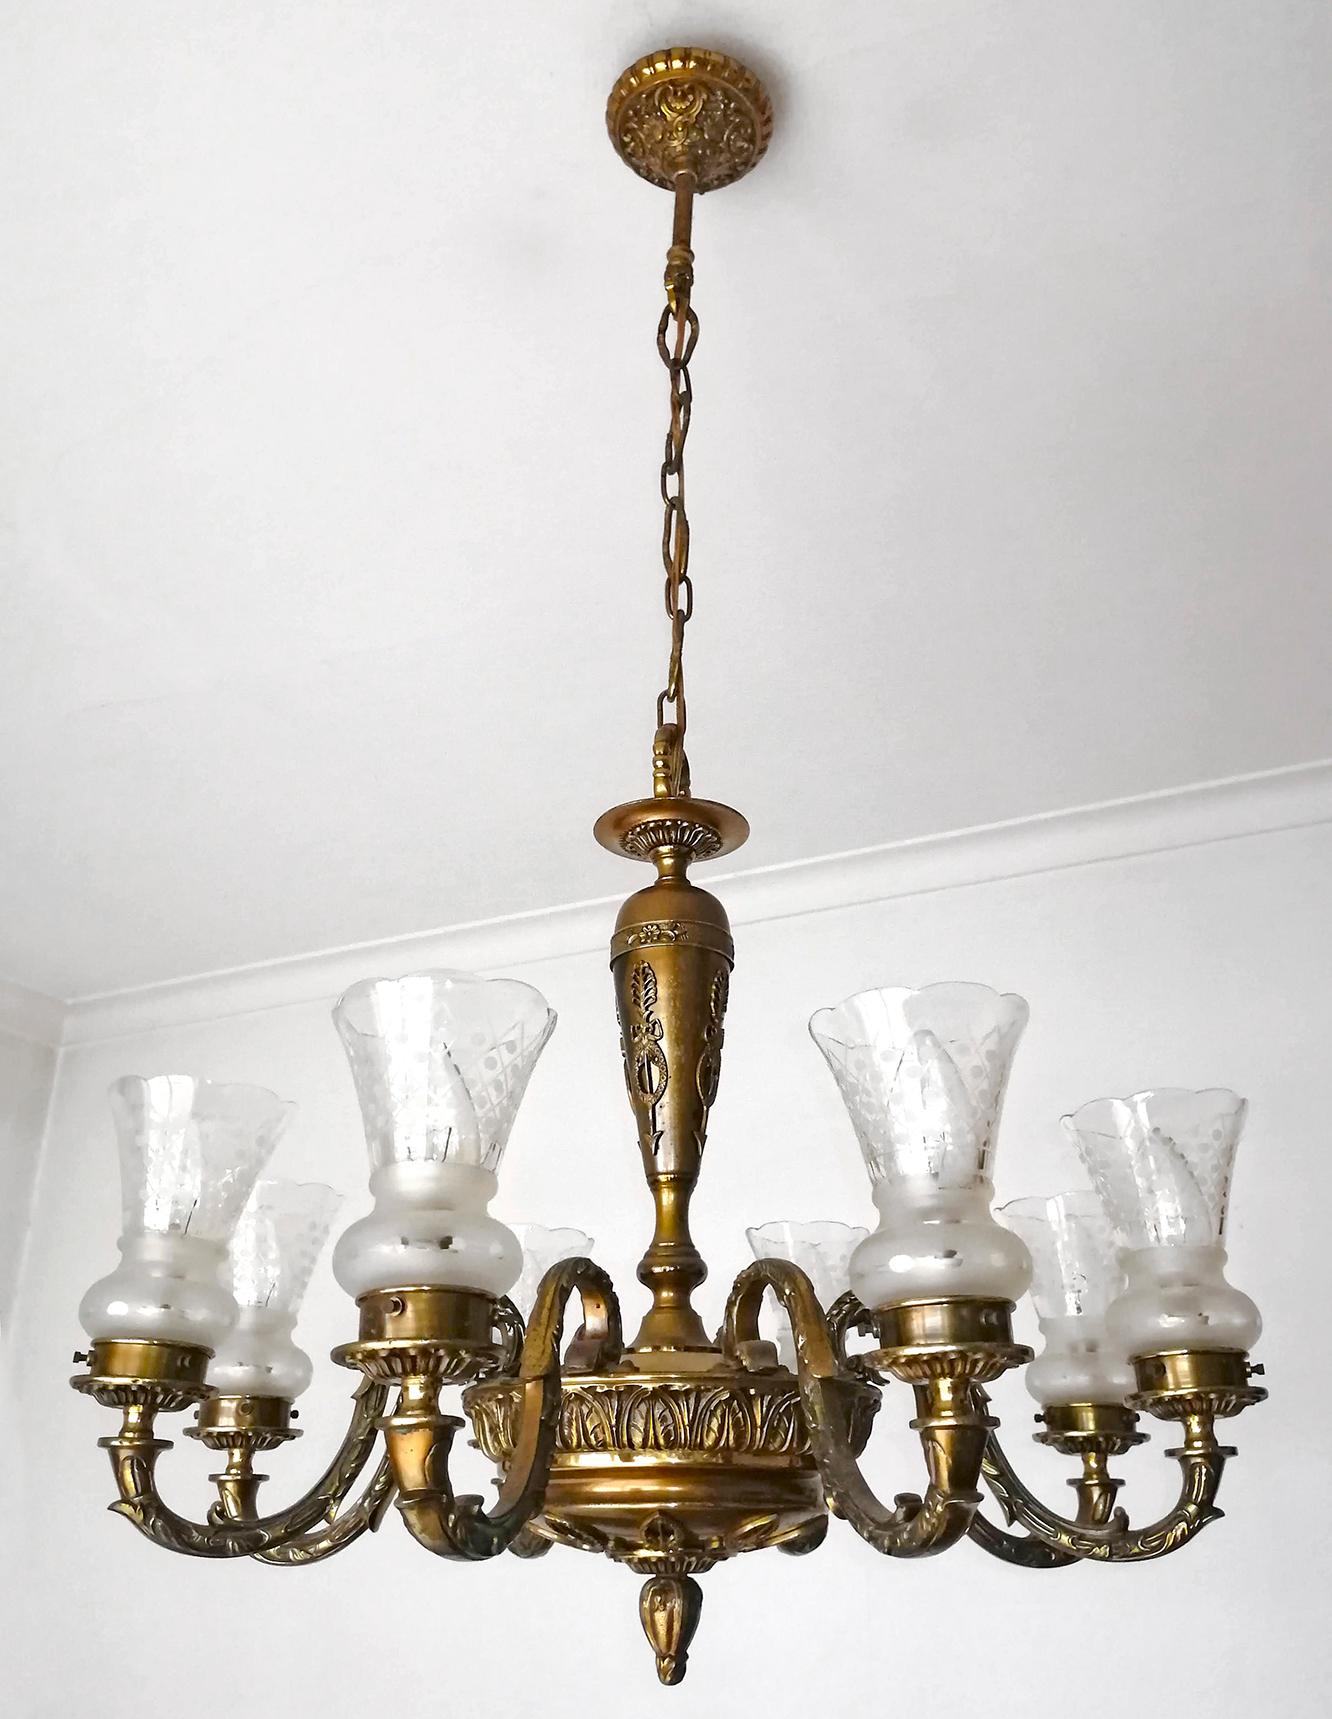 Beautiful neoclassical French Empire etched glass and gilt solid bronze 8-light chandelier,
Dimensions:
Height 39.38 in. (100 cm)
Diameter 19.69 in. (50 cm)
8-light bulbs E 14/good working condition
Assembly required. Bulbs not included.
Age